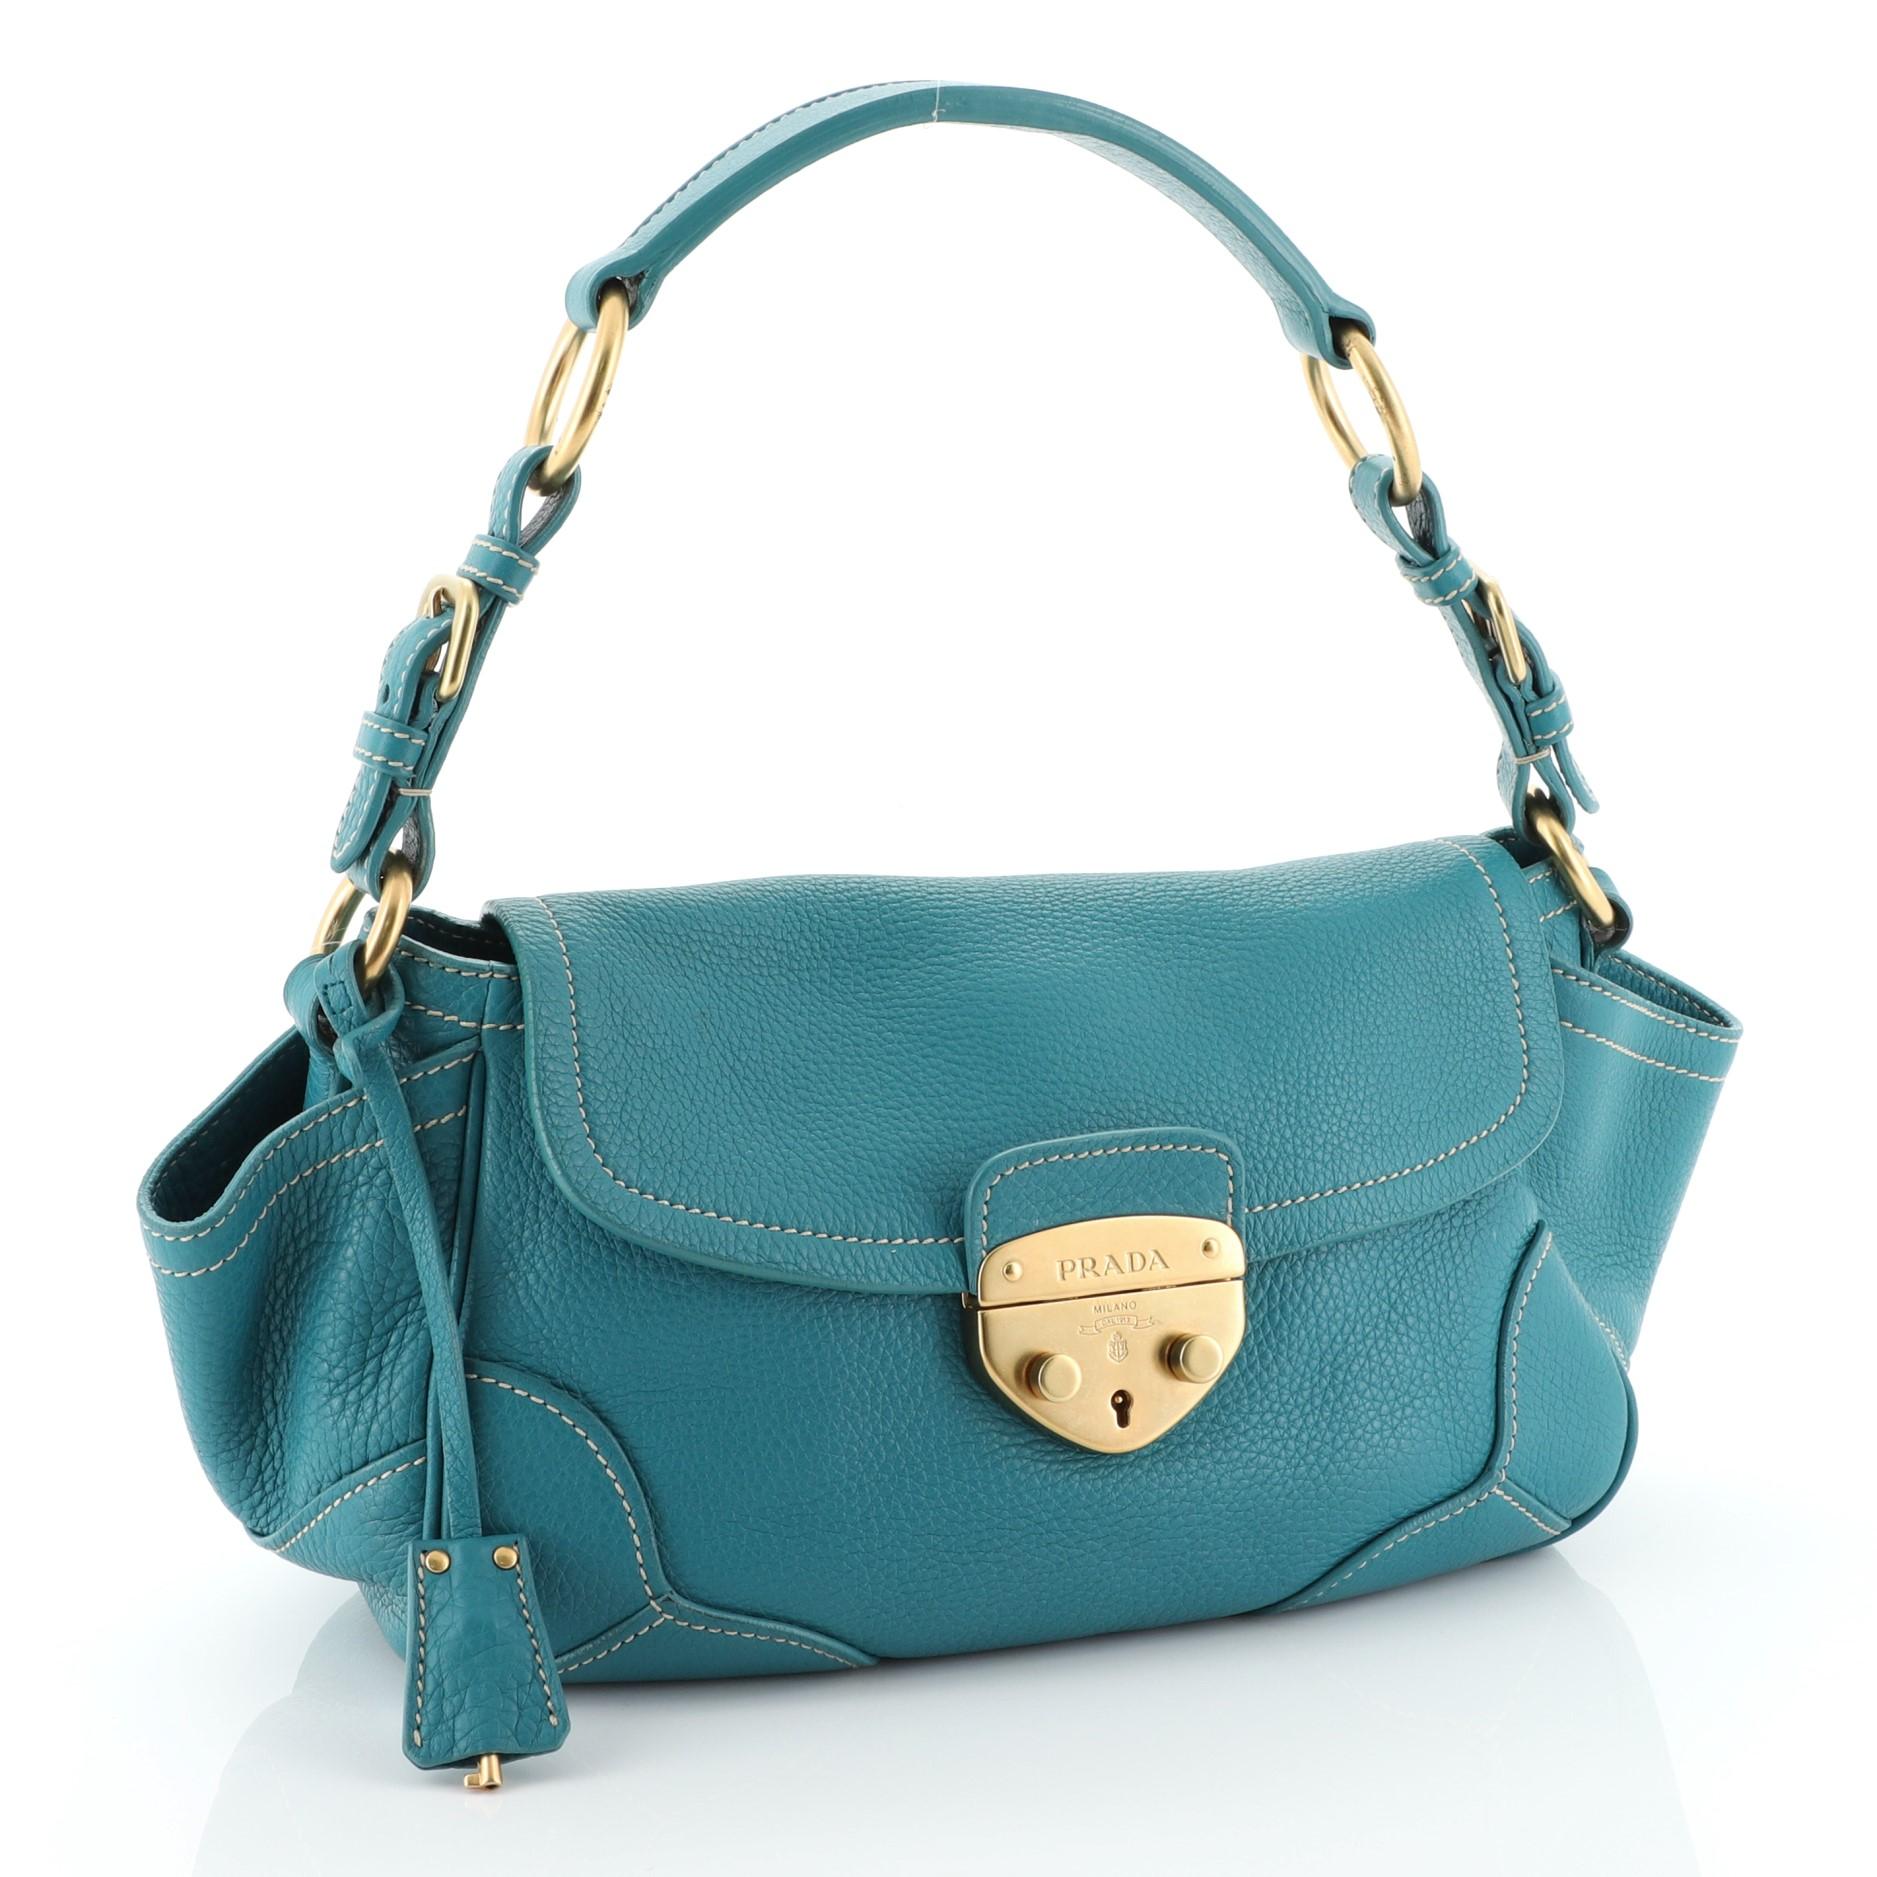 This Prada Side Pocket Flap Shoulder Bag Vitello Daino Medium, crafted from blue vitello daino leather, features flat leather shoulder strap with buckle details, raised Prada logo lettering at front, dual flap pockets at sides and matte gold-tone